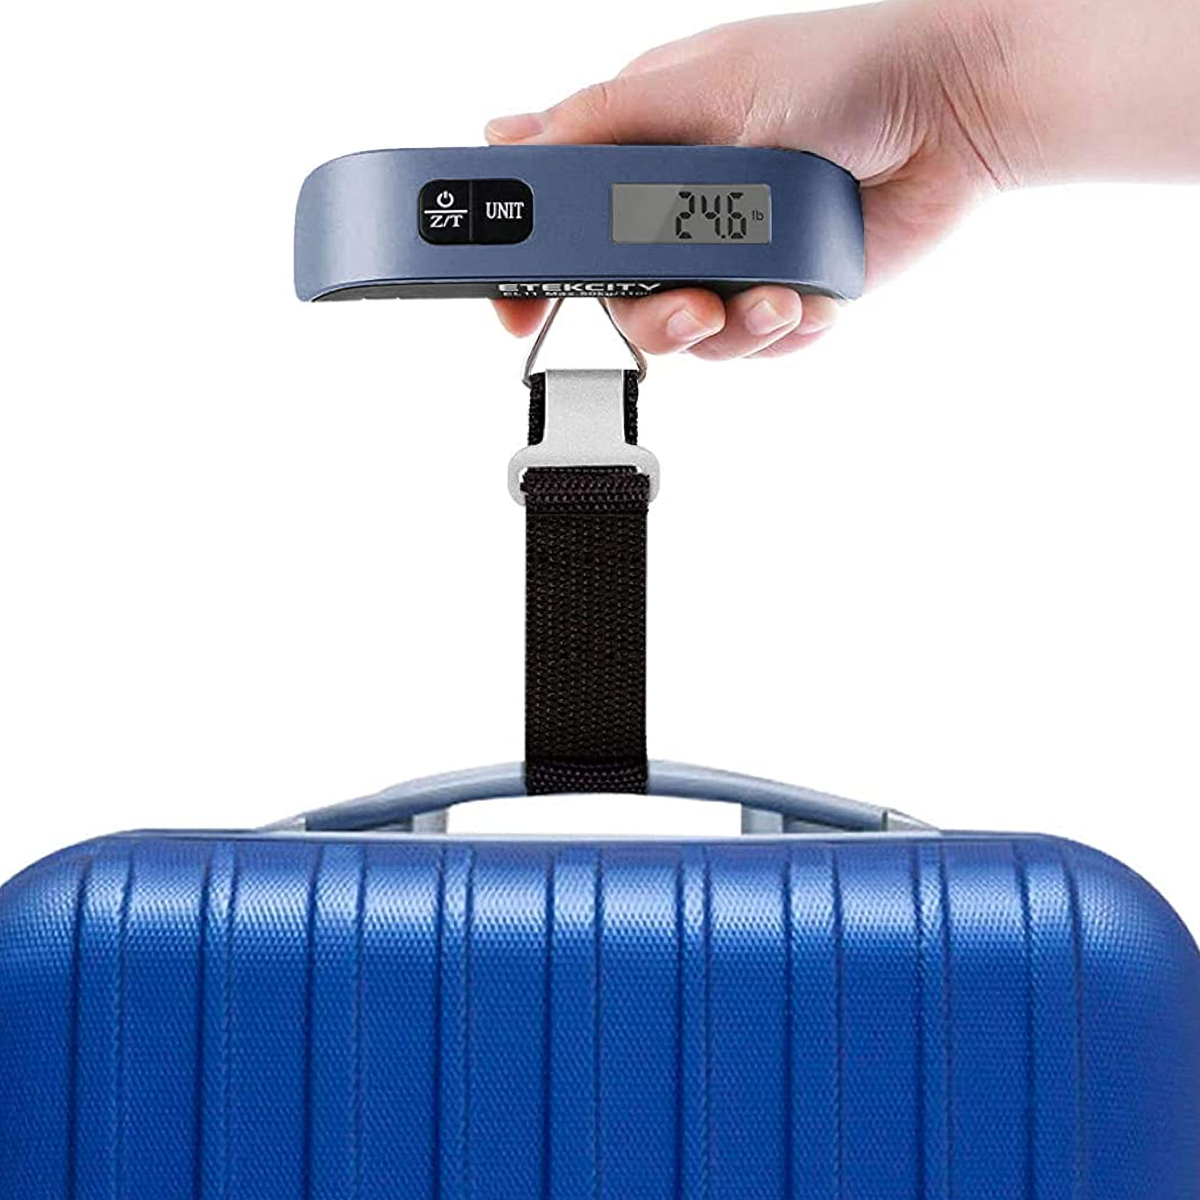 The best luggage scales for weighing luggage - Daily Mail